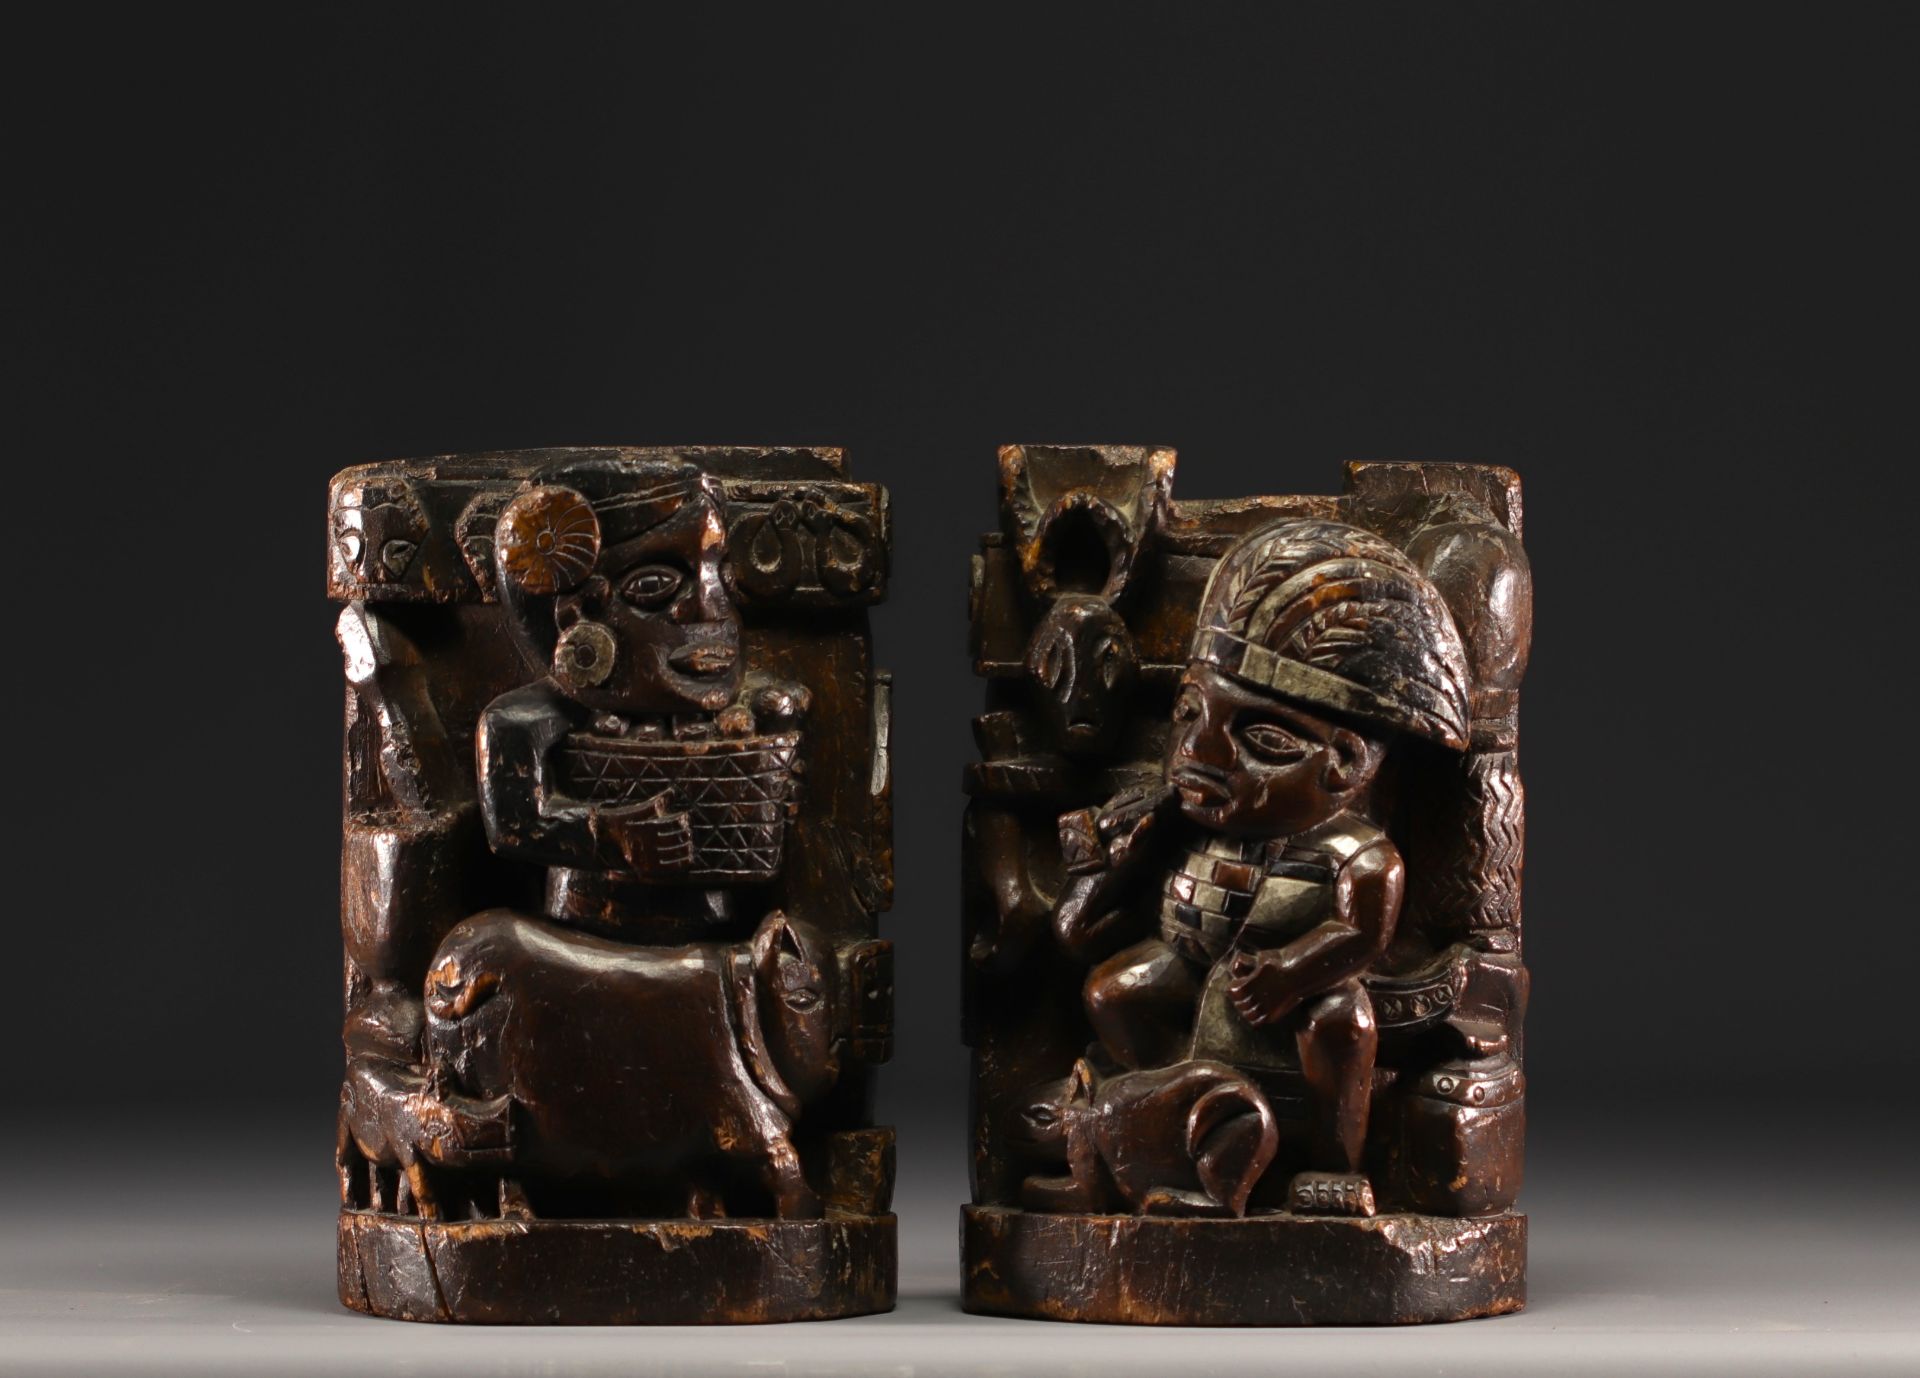 2 Paiwan sculptures in sculpted wood . Taiwan